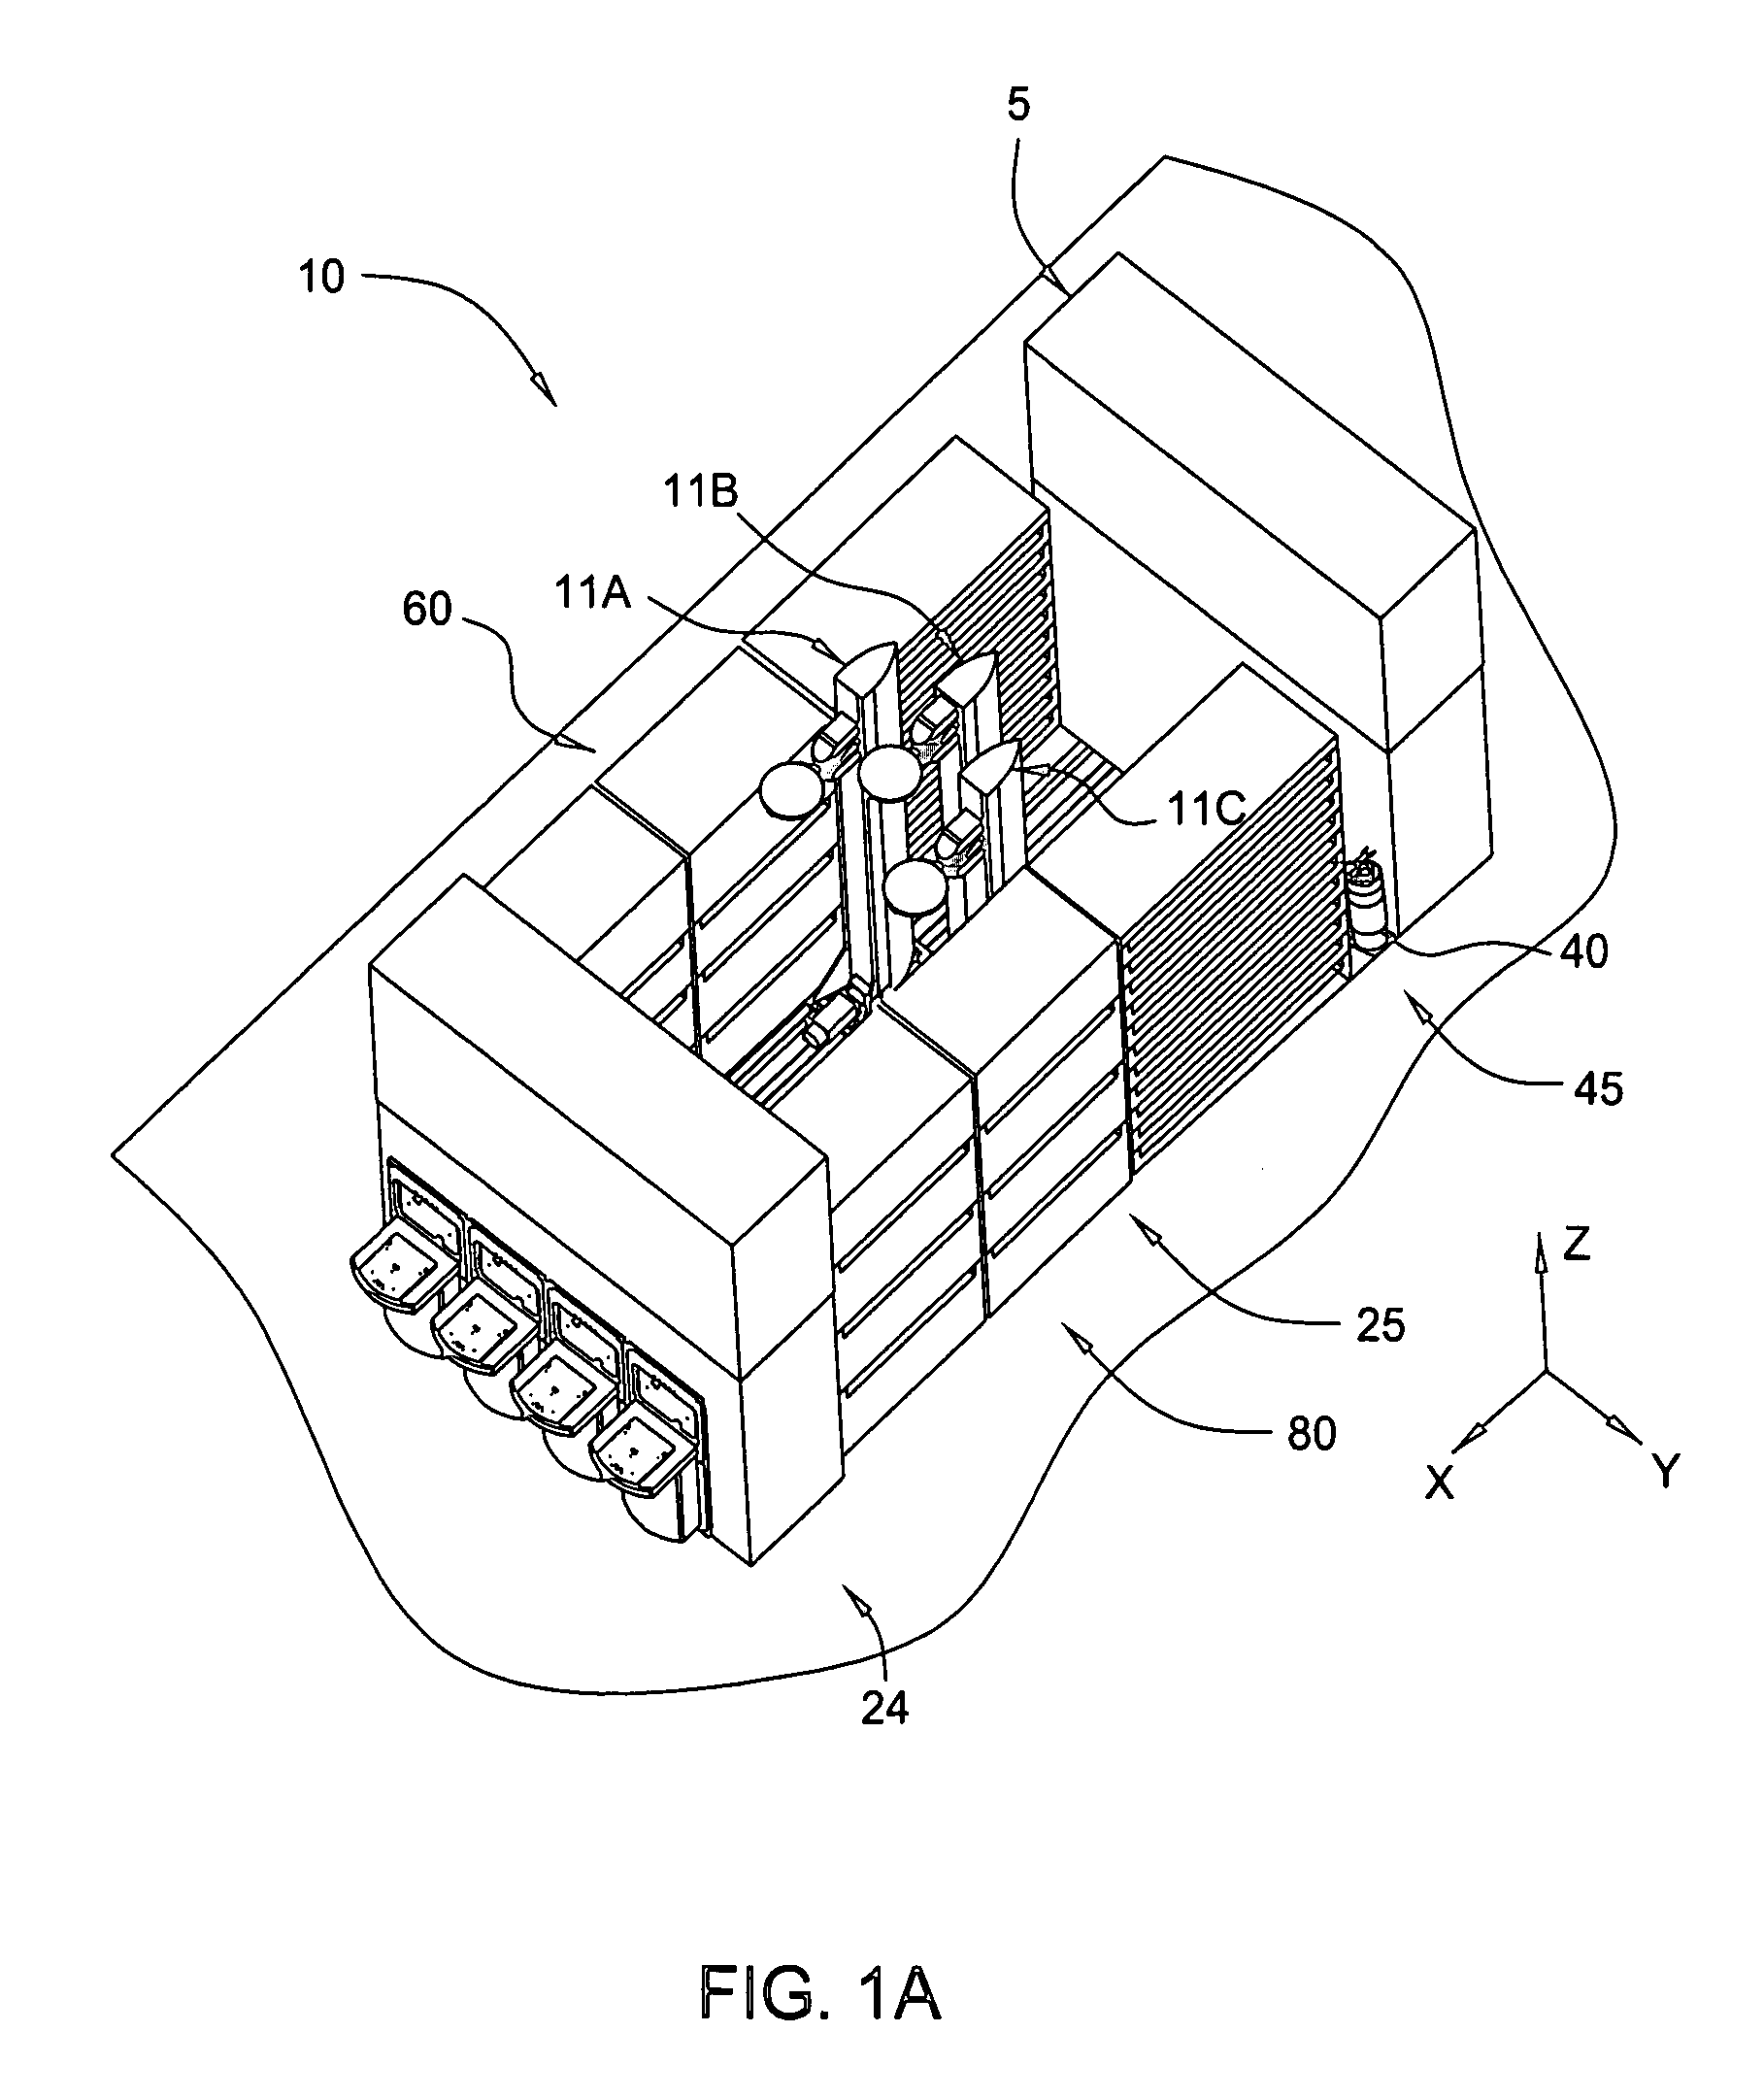 Method of retaining a substrate during a substrate transferring process